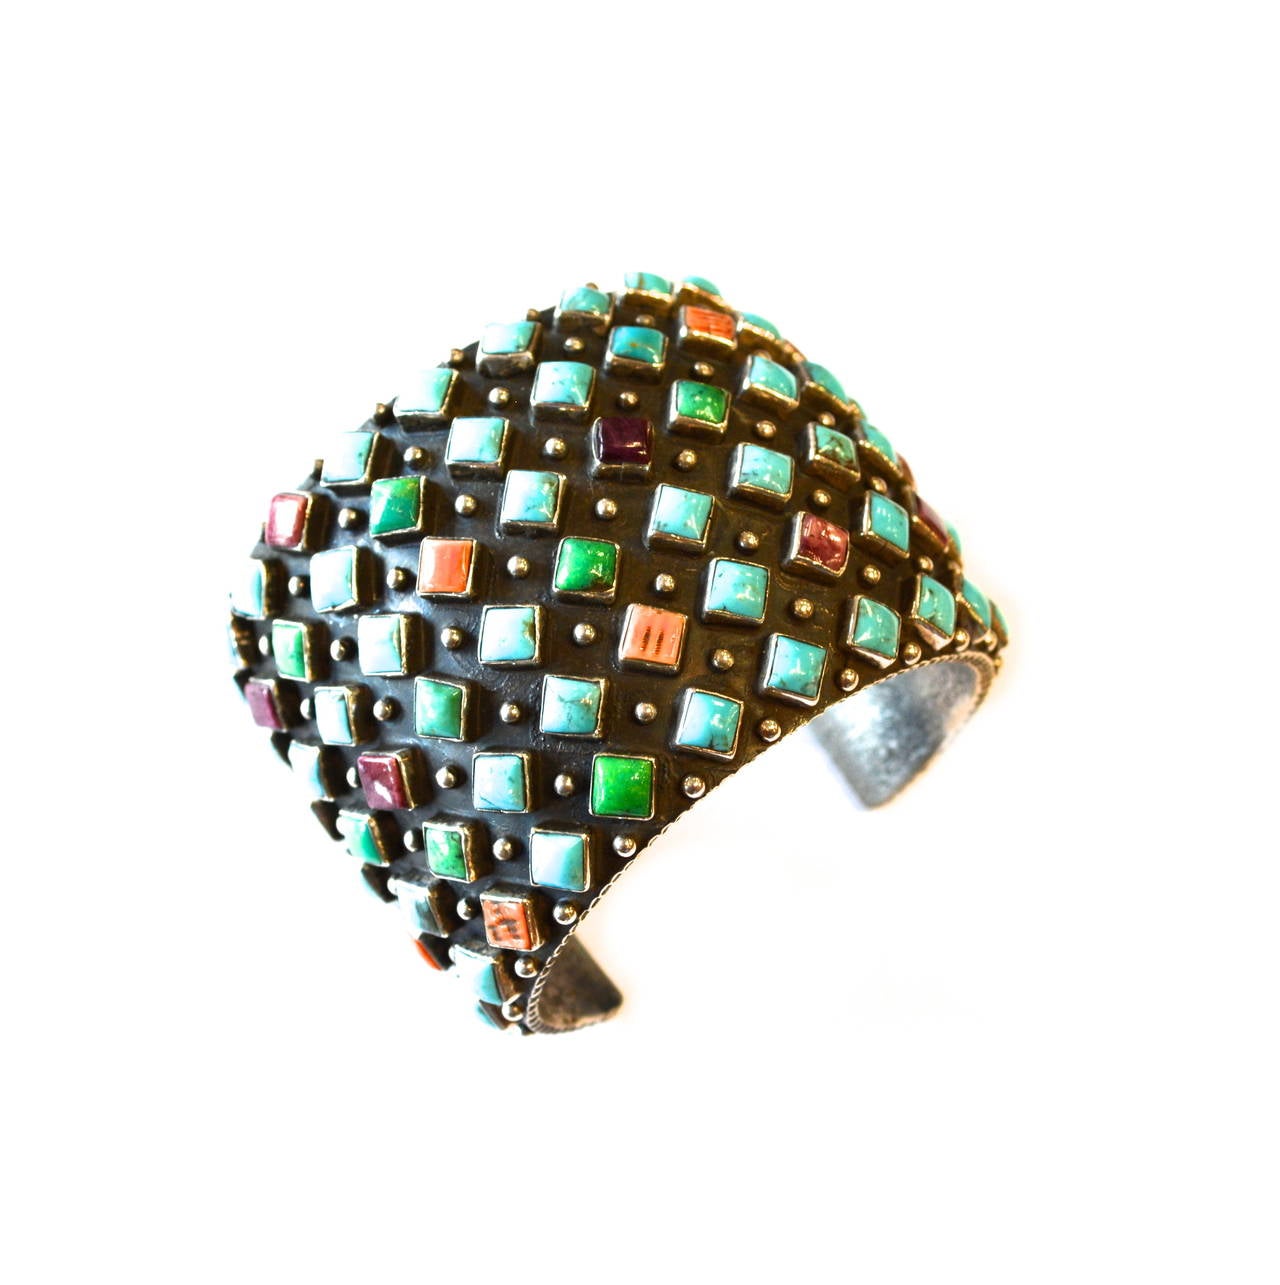 Gorgeous multi colored sterling rounded stud and geometric turquoise gemstone cuff. Signed R sterling.  Features blue and green turquoise stones, coral and amethyst in a diamond design. Circa 1970s-80s.  Appears to be sand cast in texture, per the